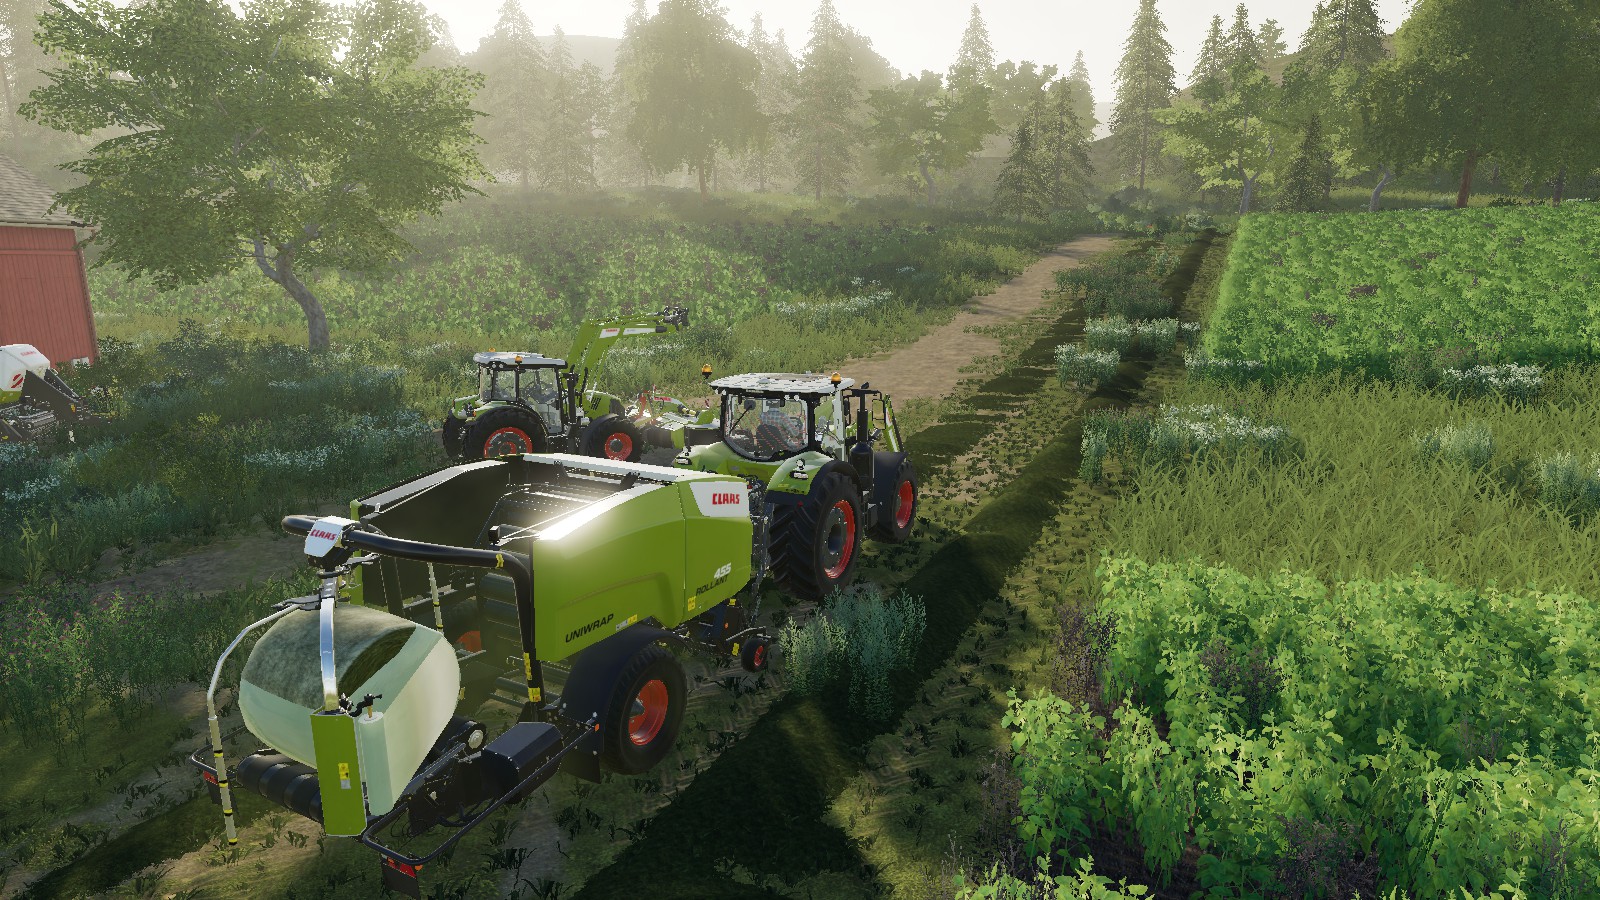 https://www.pcinvasion.com/wp-content/uploads/2021/04/Farming-Simulator-19-PC-Platinum-Expansion-CLAAS-Mowing-and-Bailing-Grass-1.jpg